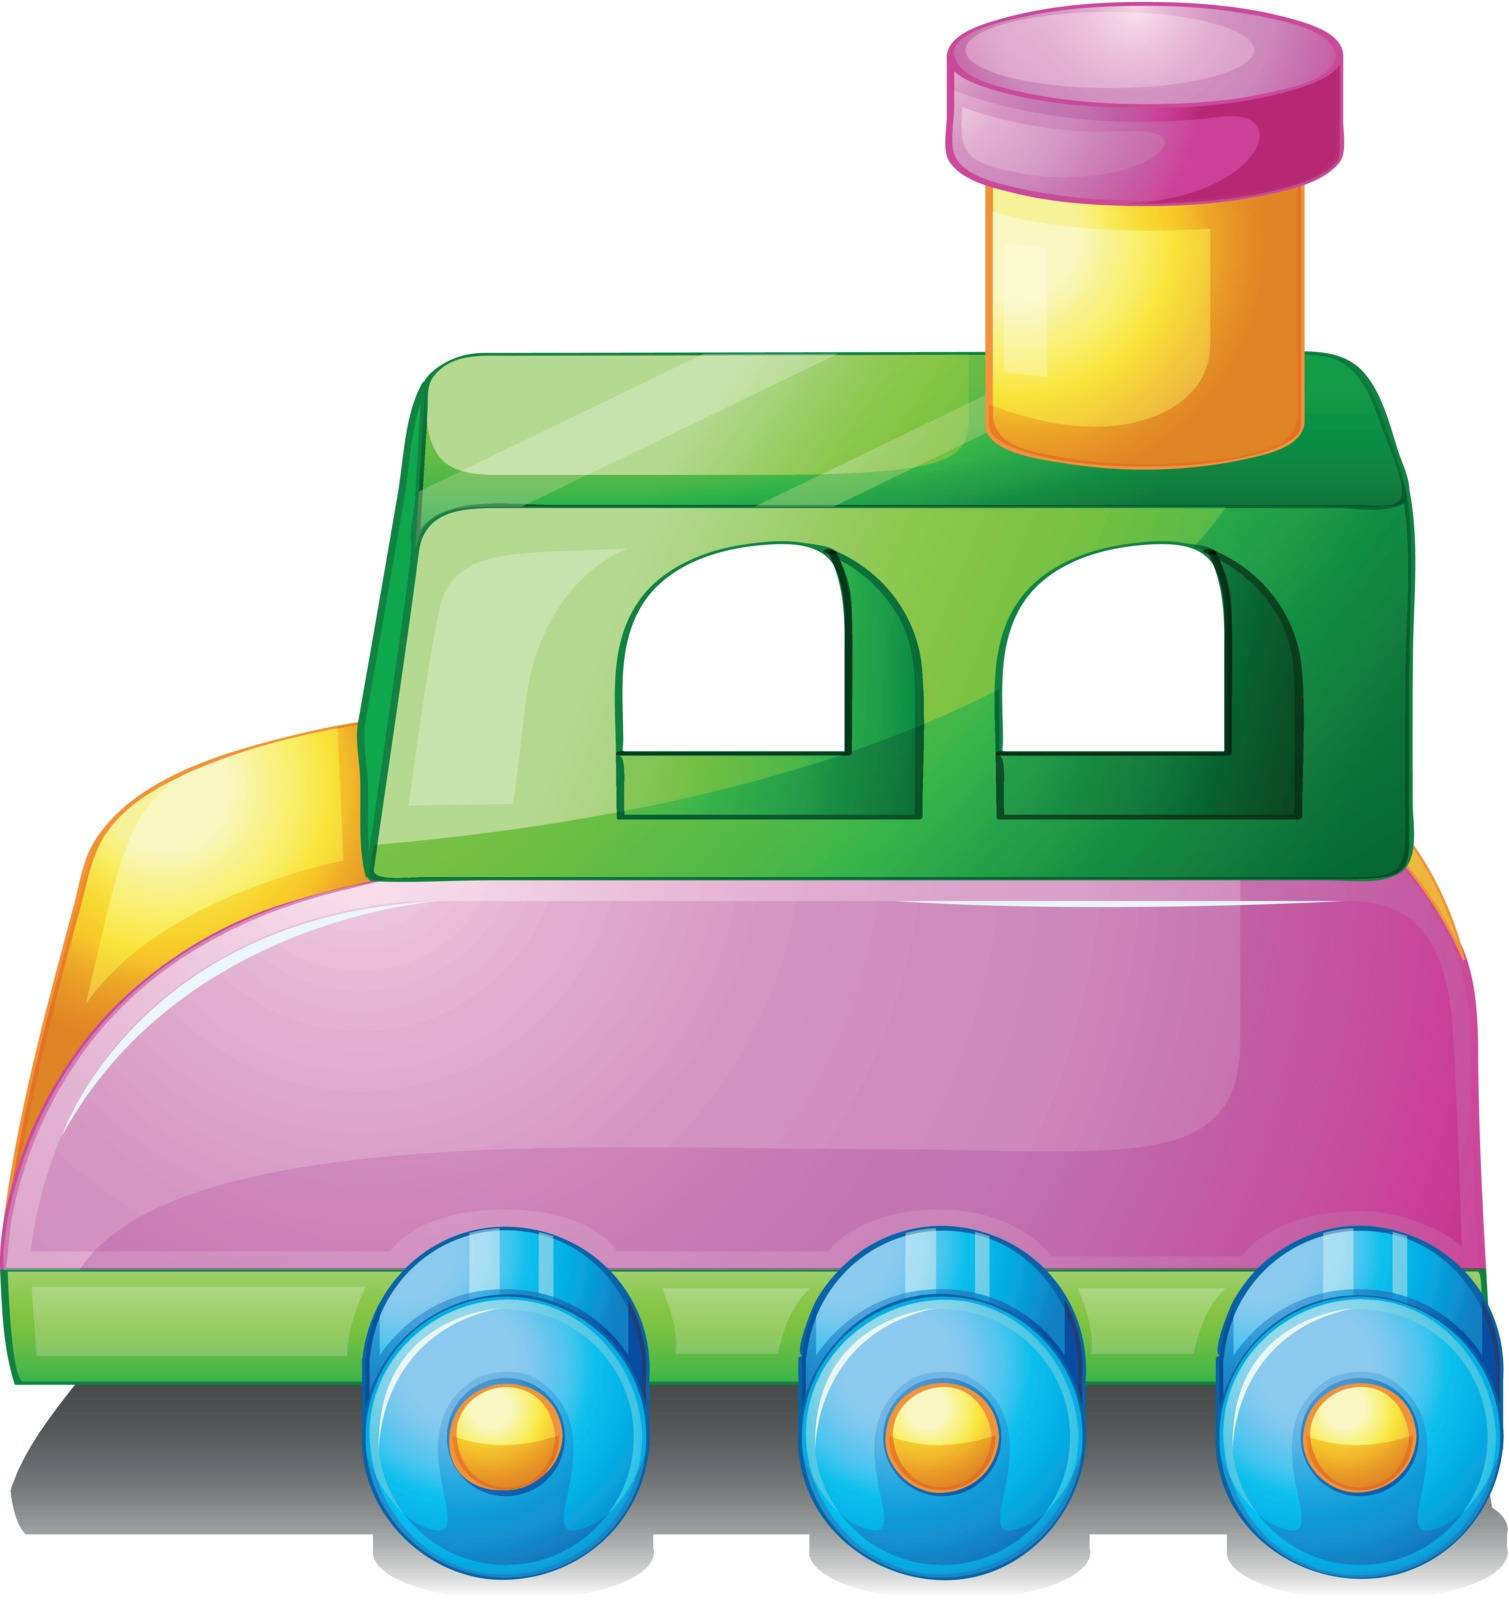 Illustration of a colorful toy car on a white background